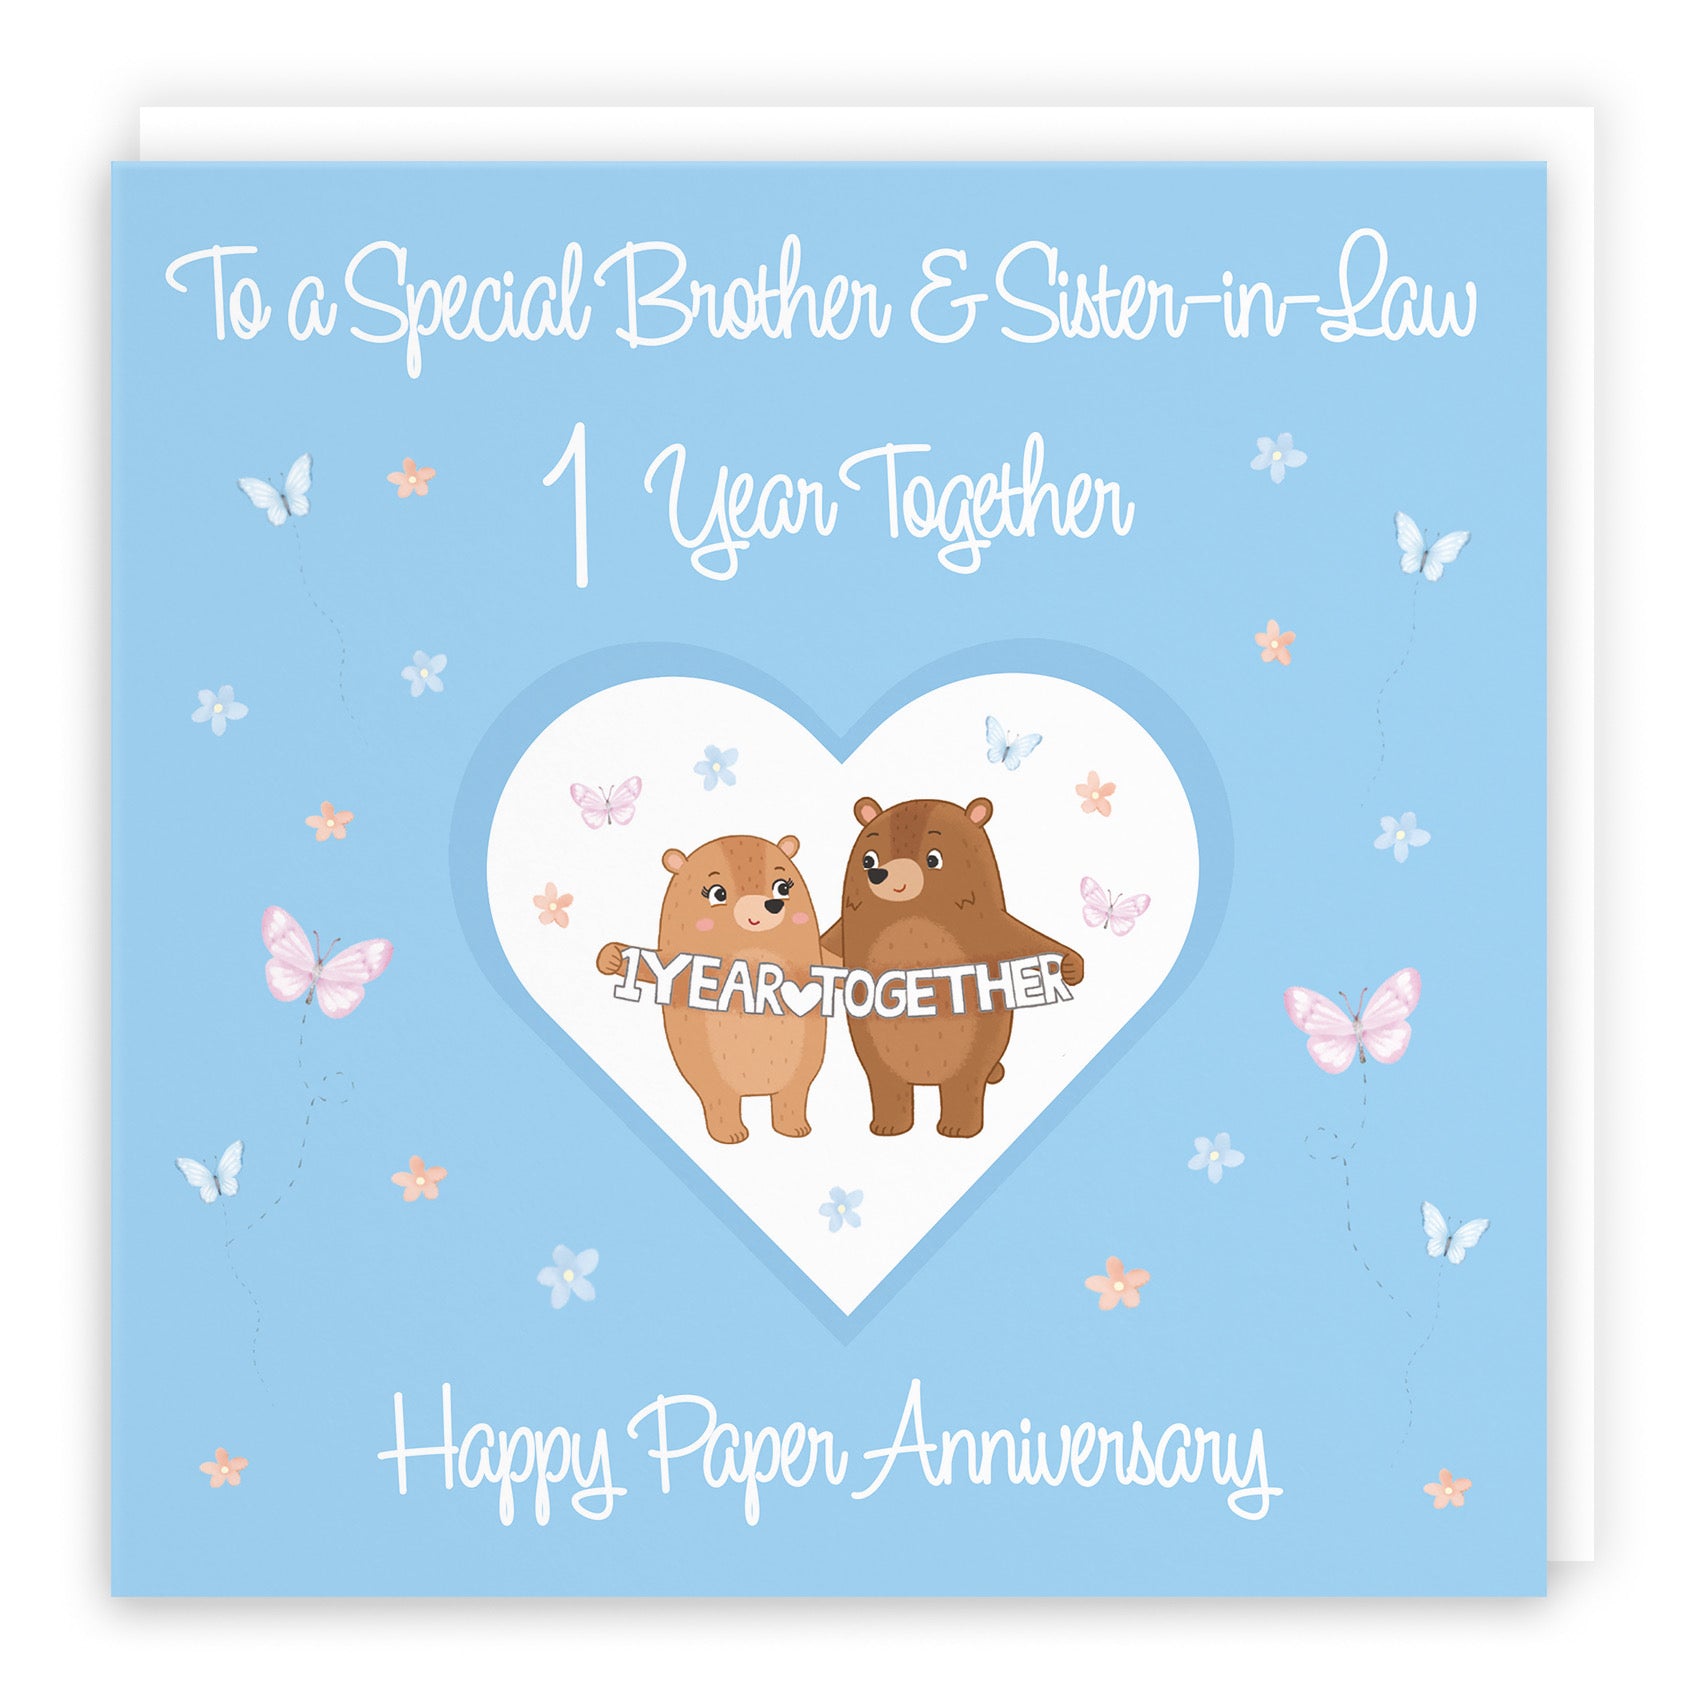 Large Brother & Sister-in-Law 1st Anniversary Card Romantic Meadows - Default Title (B0CXY3NNTB)